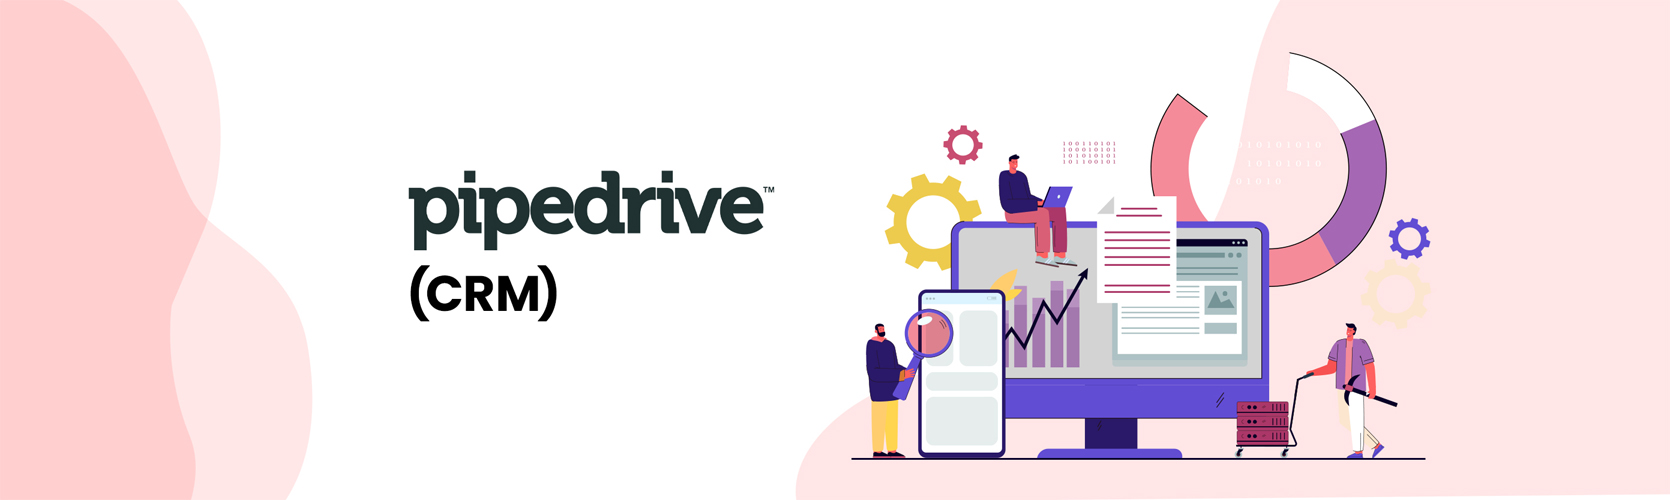 We are Premier Solution Provider for Pipedrive